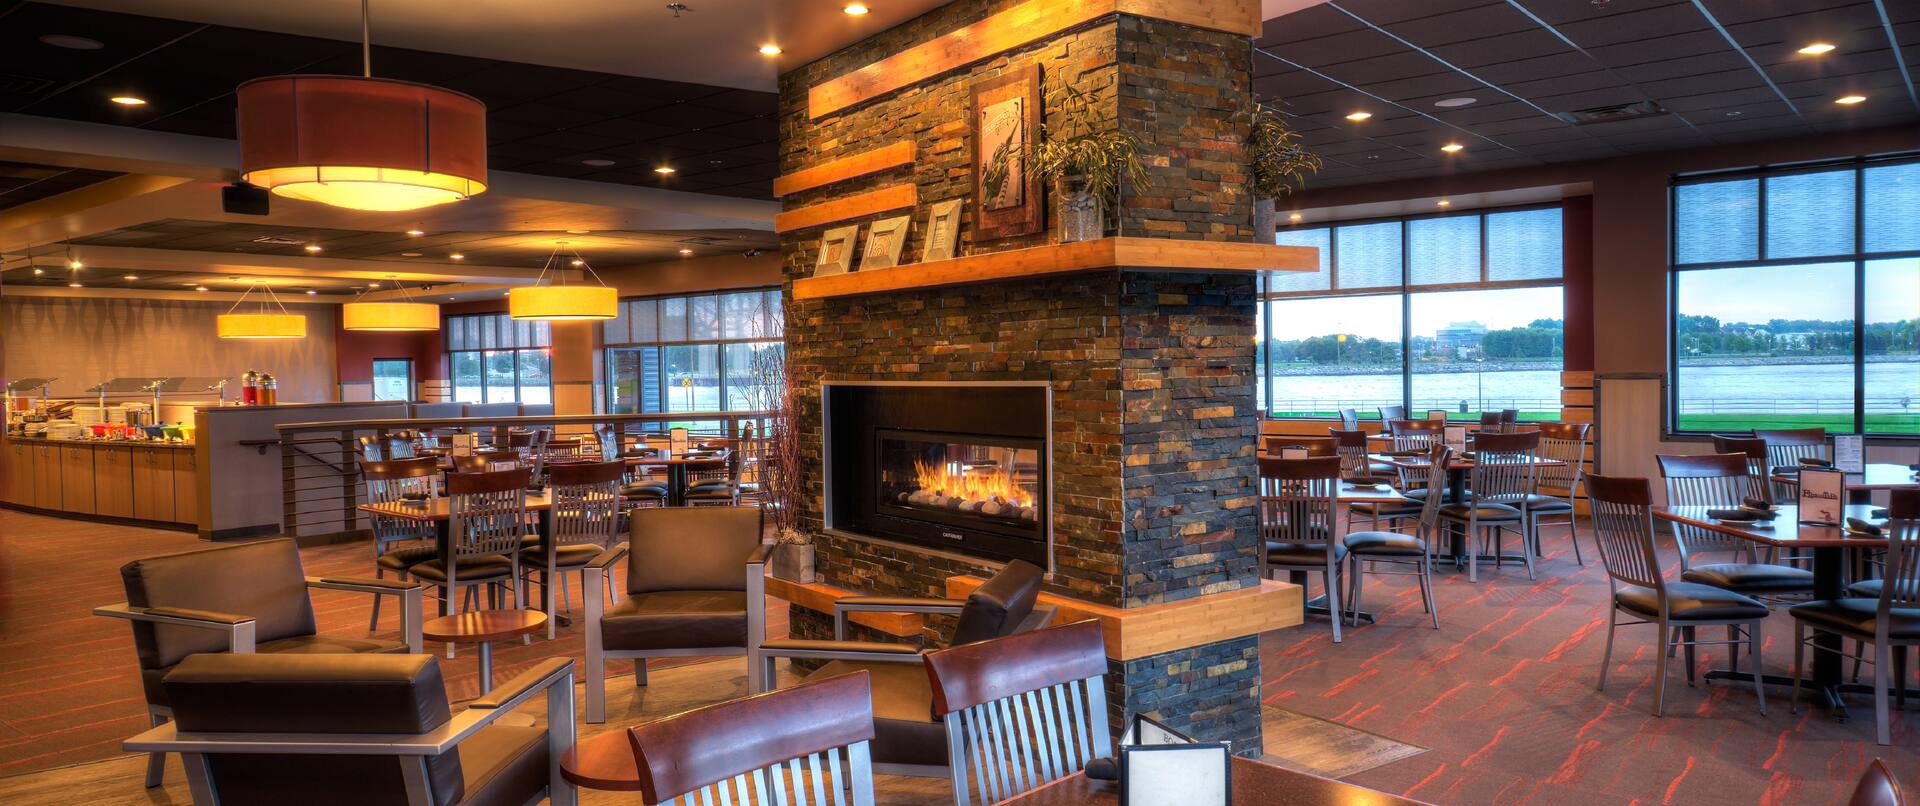 Dining Tables, Chairs, Wall Art, Fireplace, Windows, and Food Service Area in Restaurant